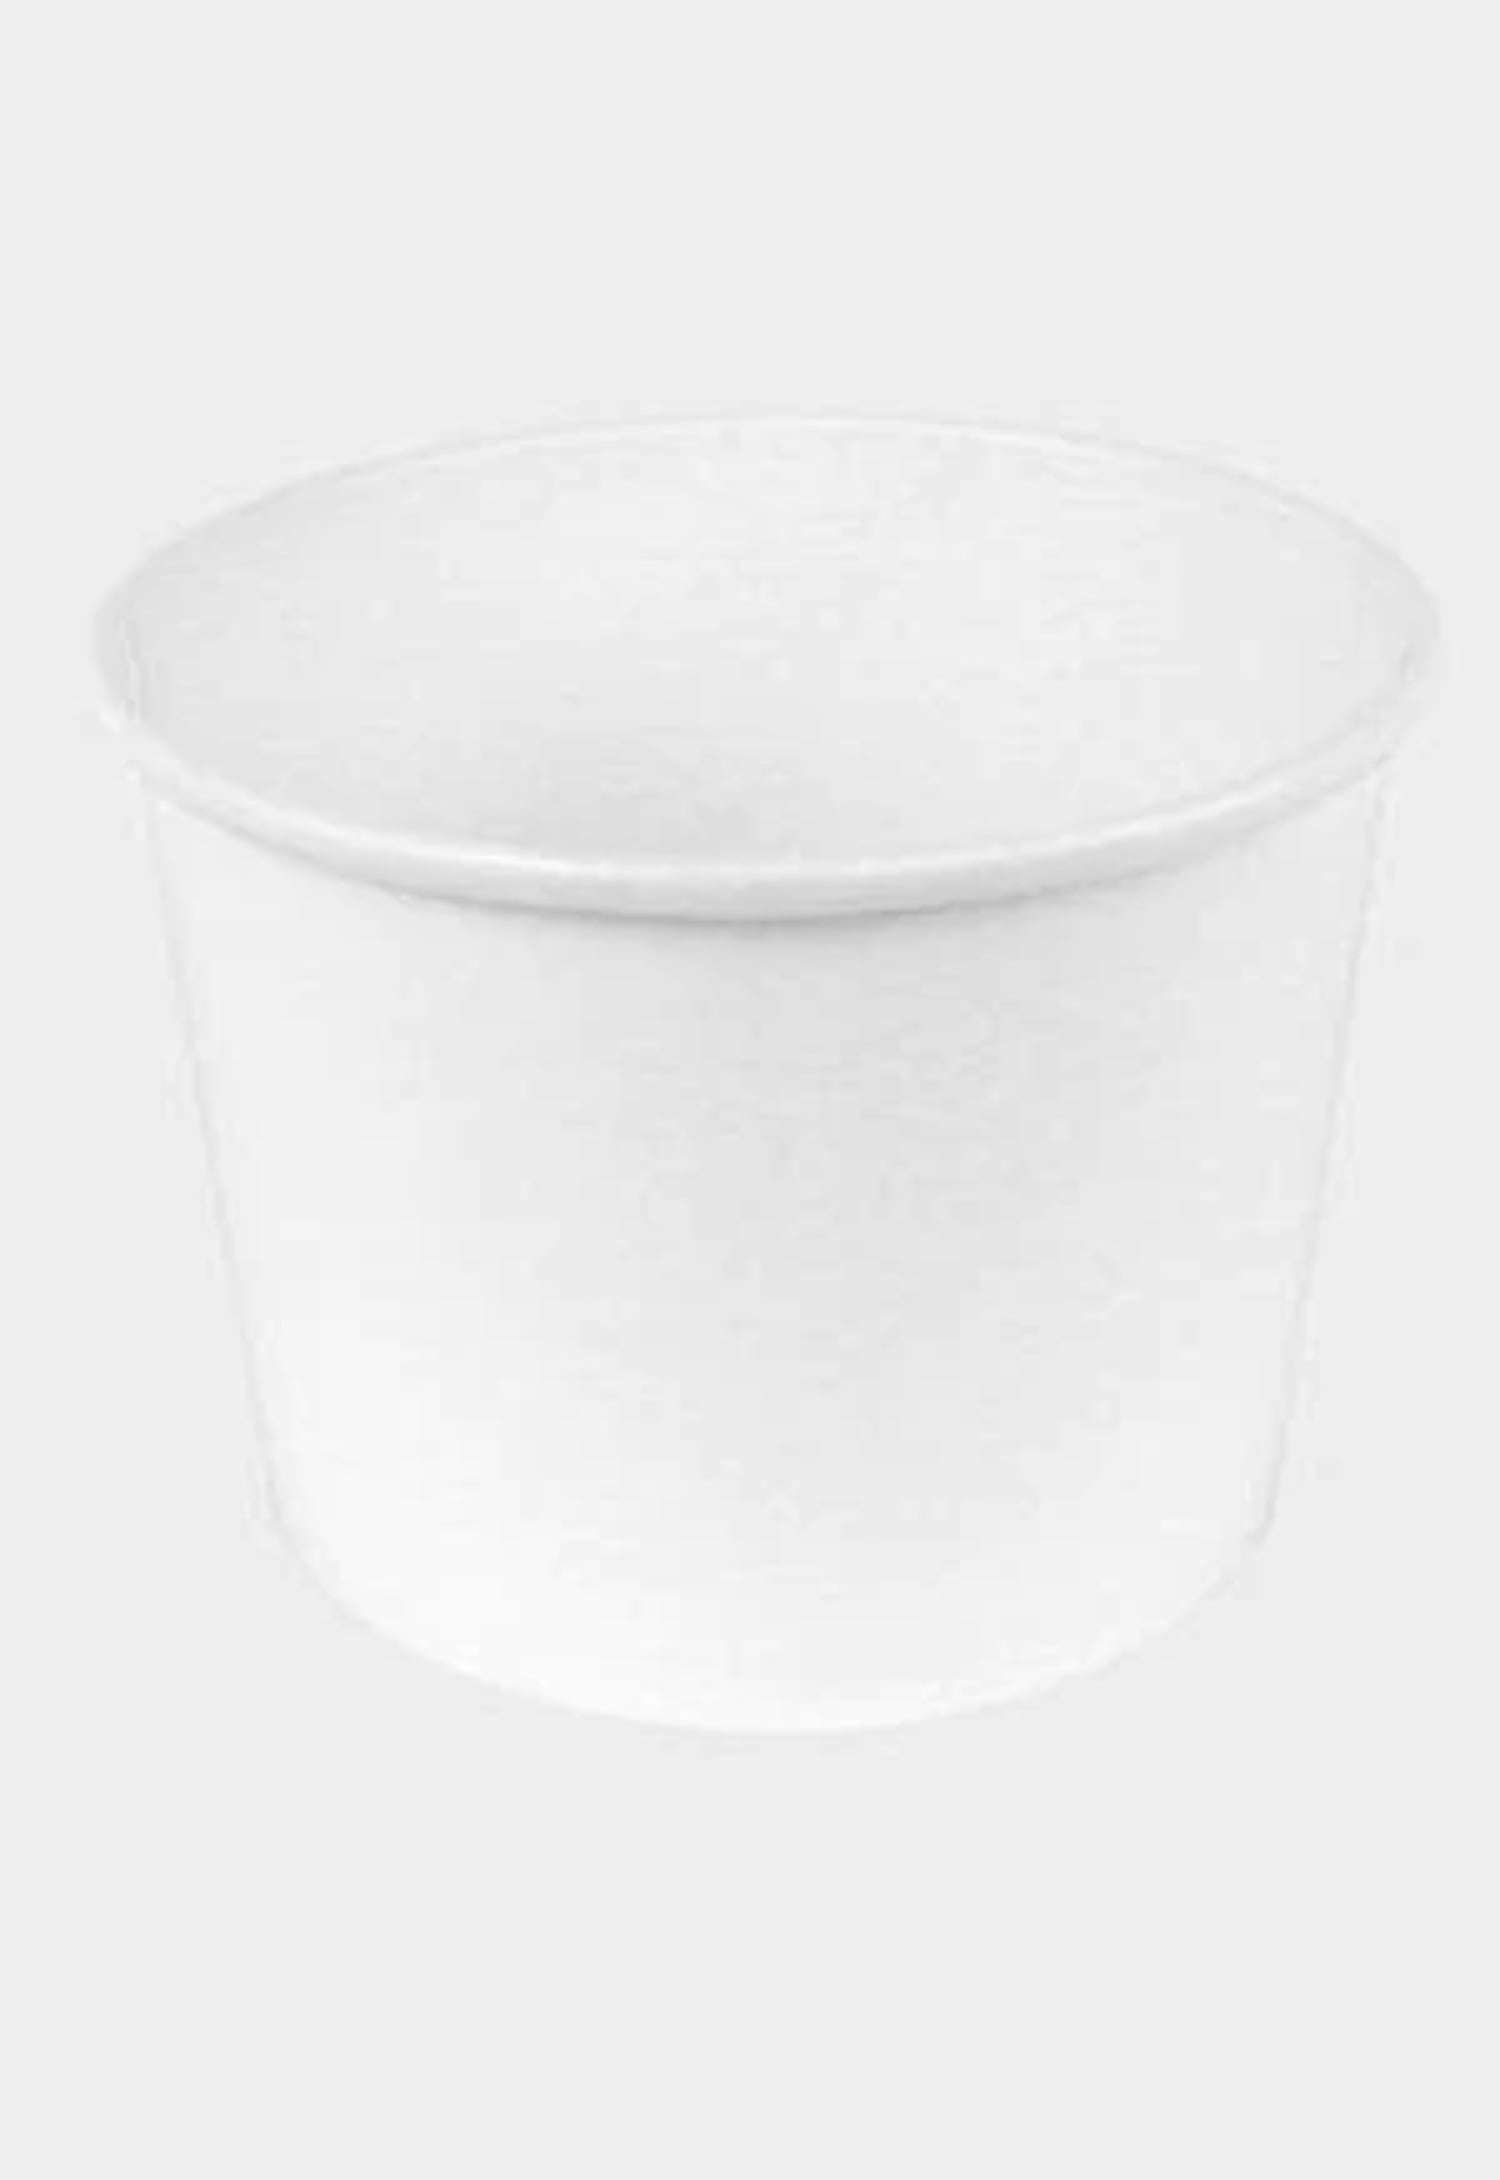 UNIQIFY 16 oz Ice Cream To-Go Containers and Lids